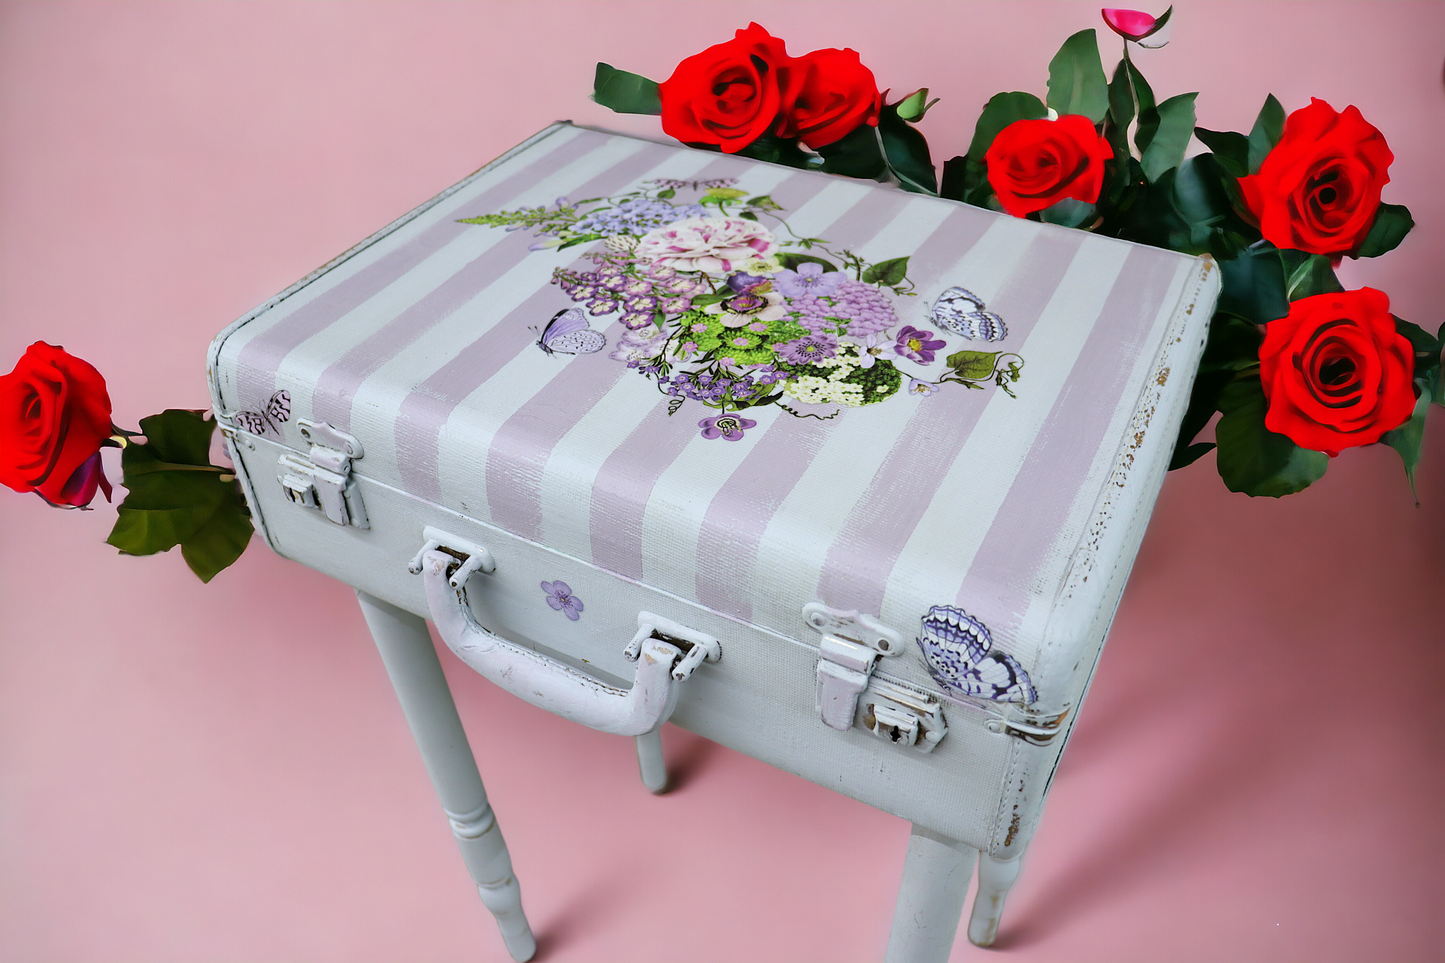 Vintage Suitcase End Table with Furniture Artist Kelly Entwistle